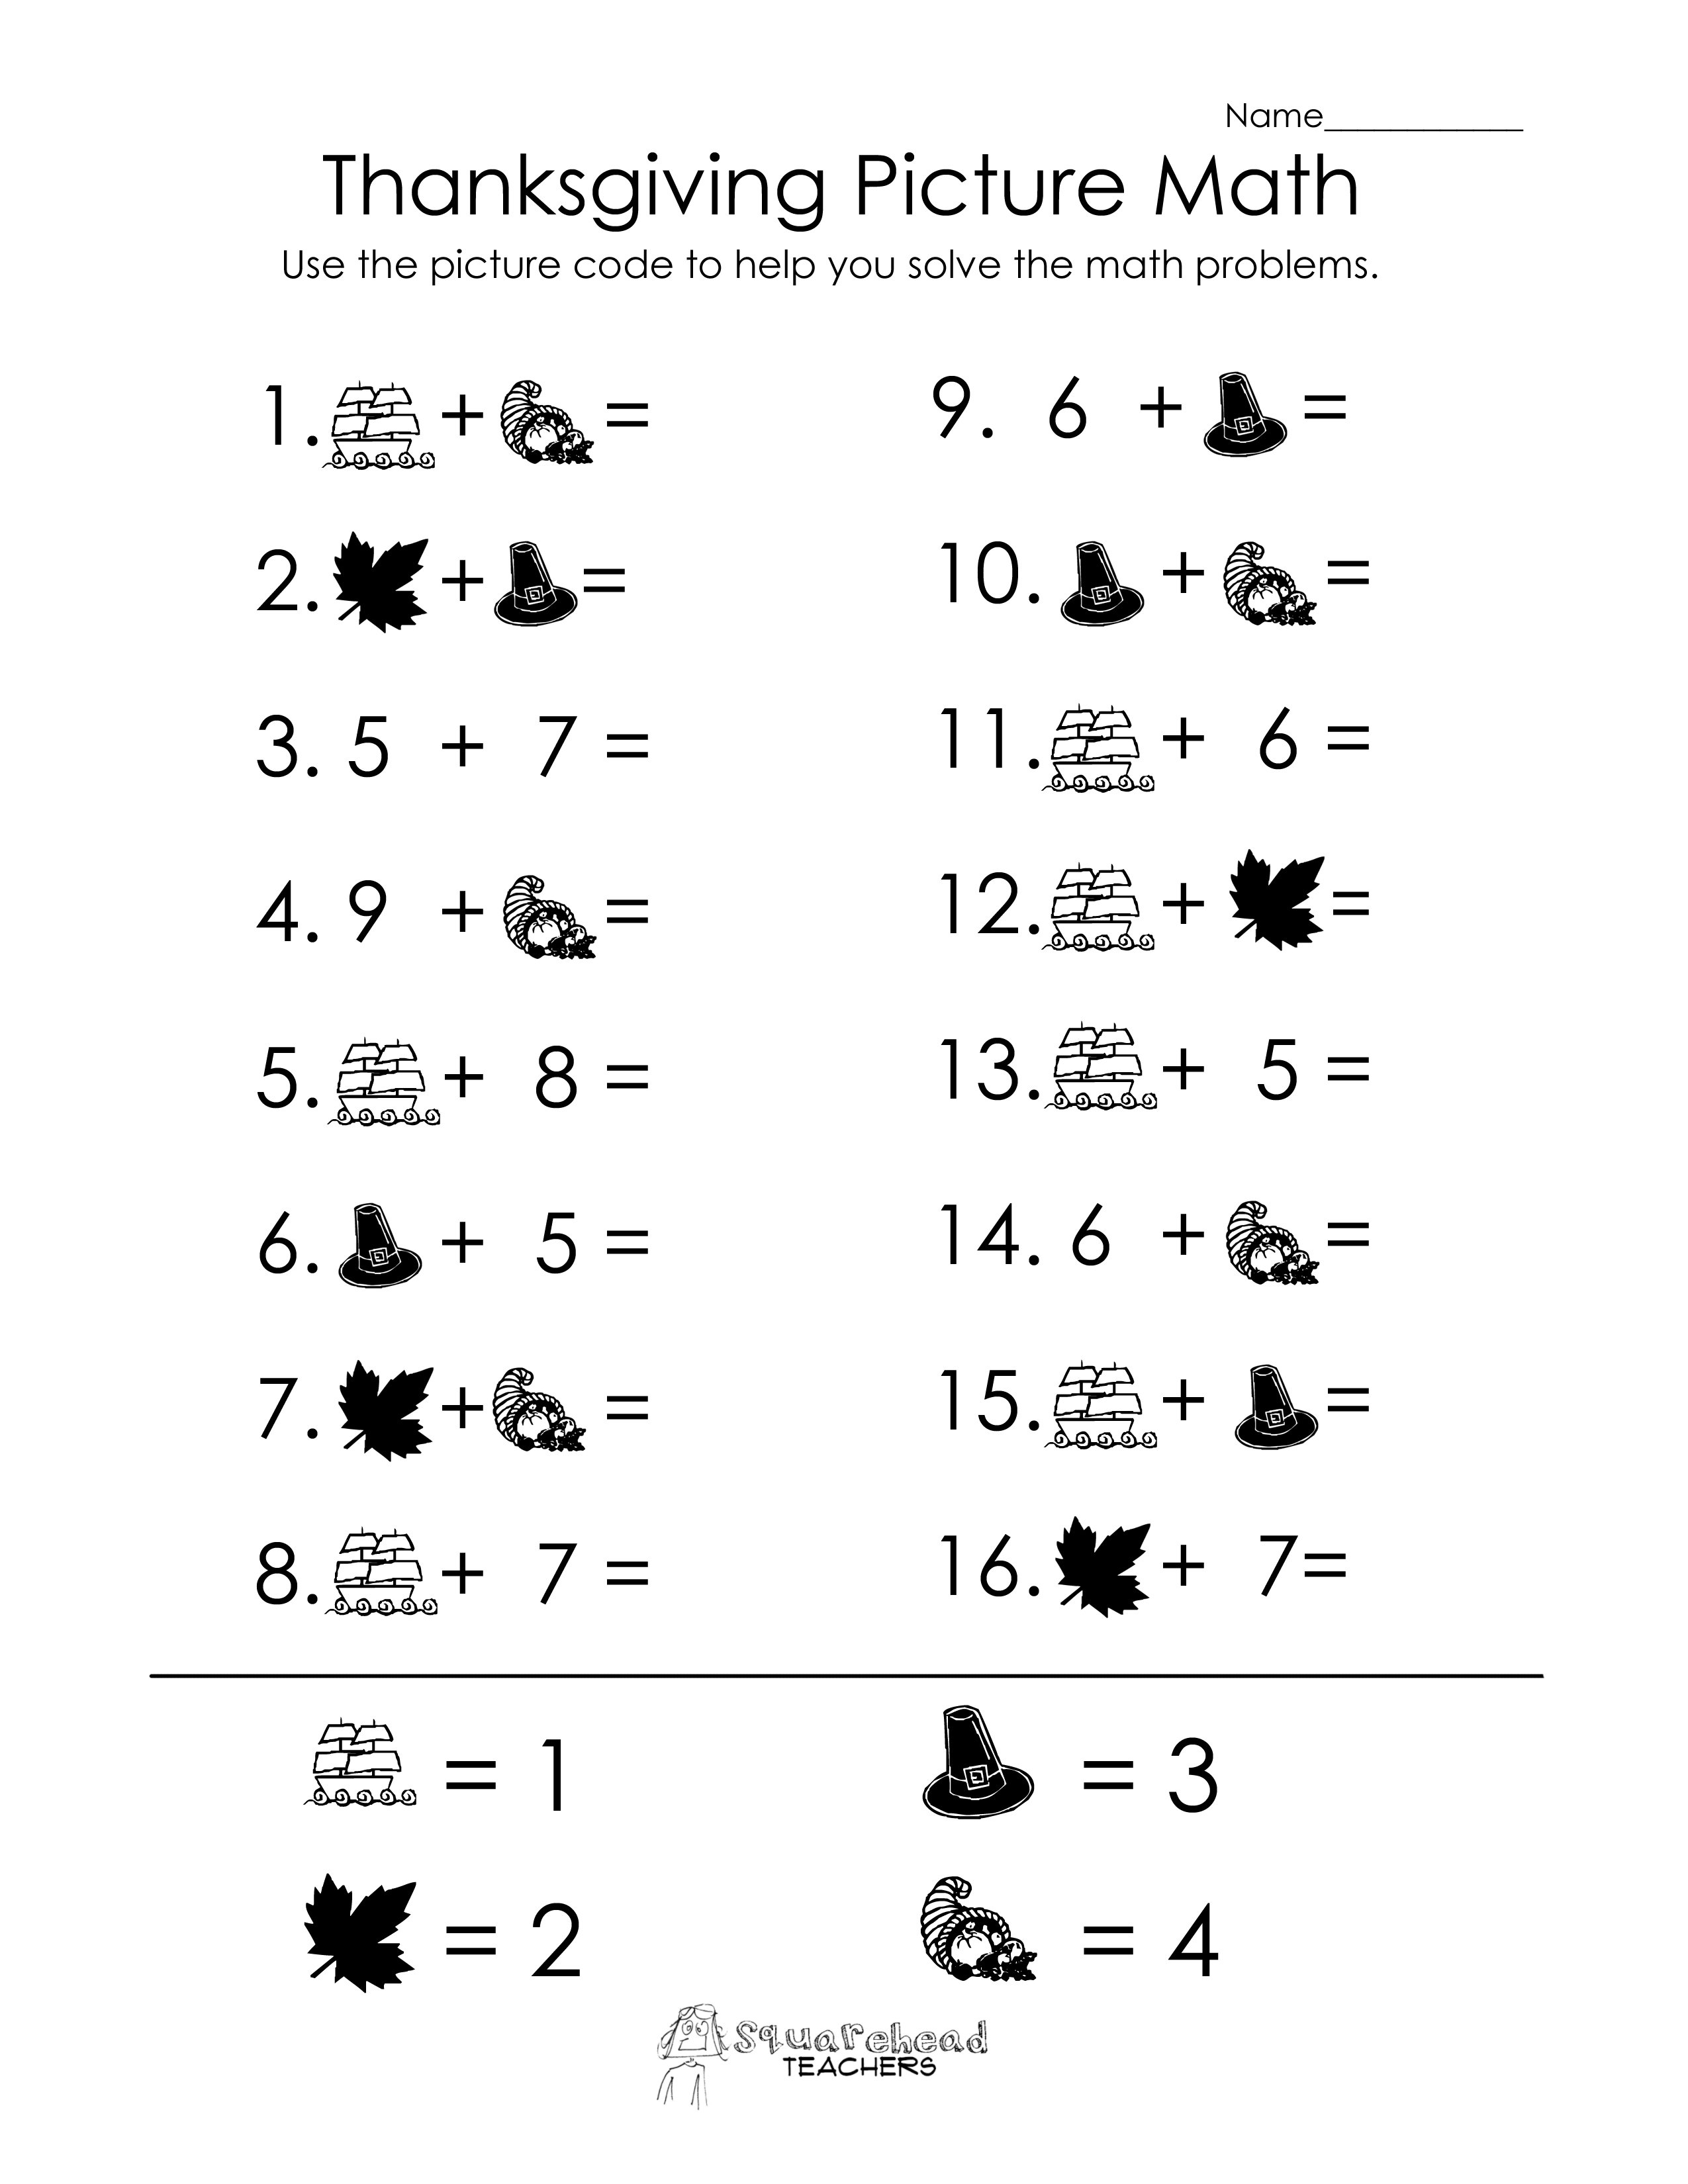 Thanksgiving Math Worksheets 5th Grade The Best Worksheets Image